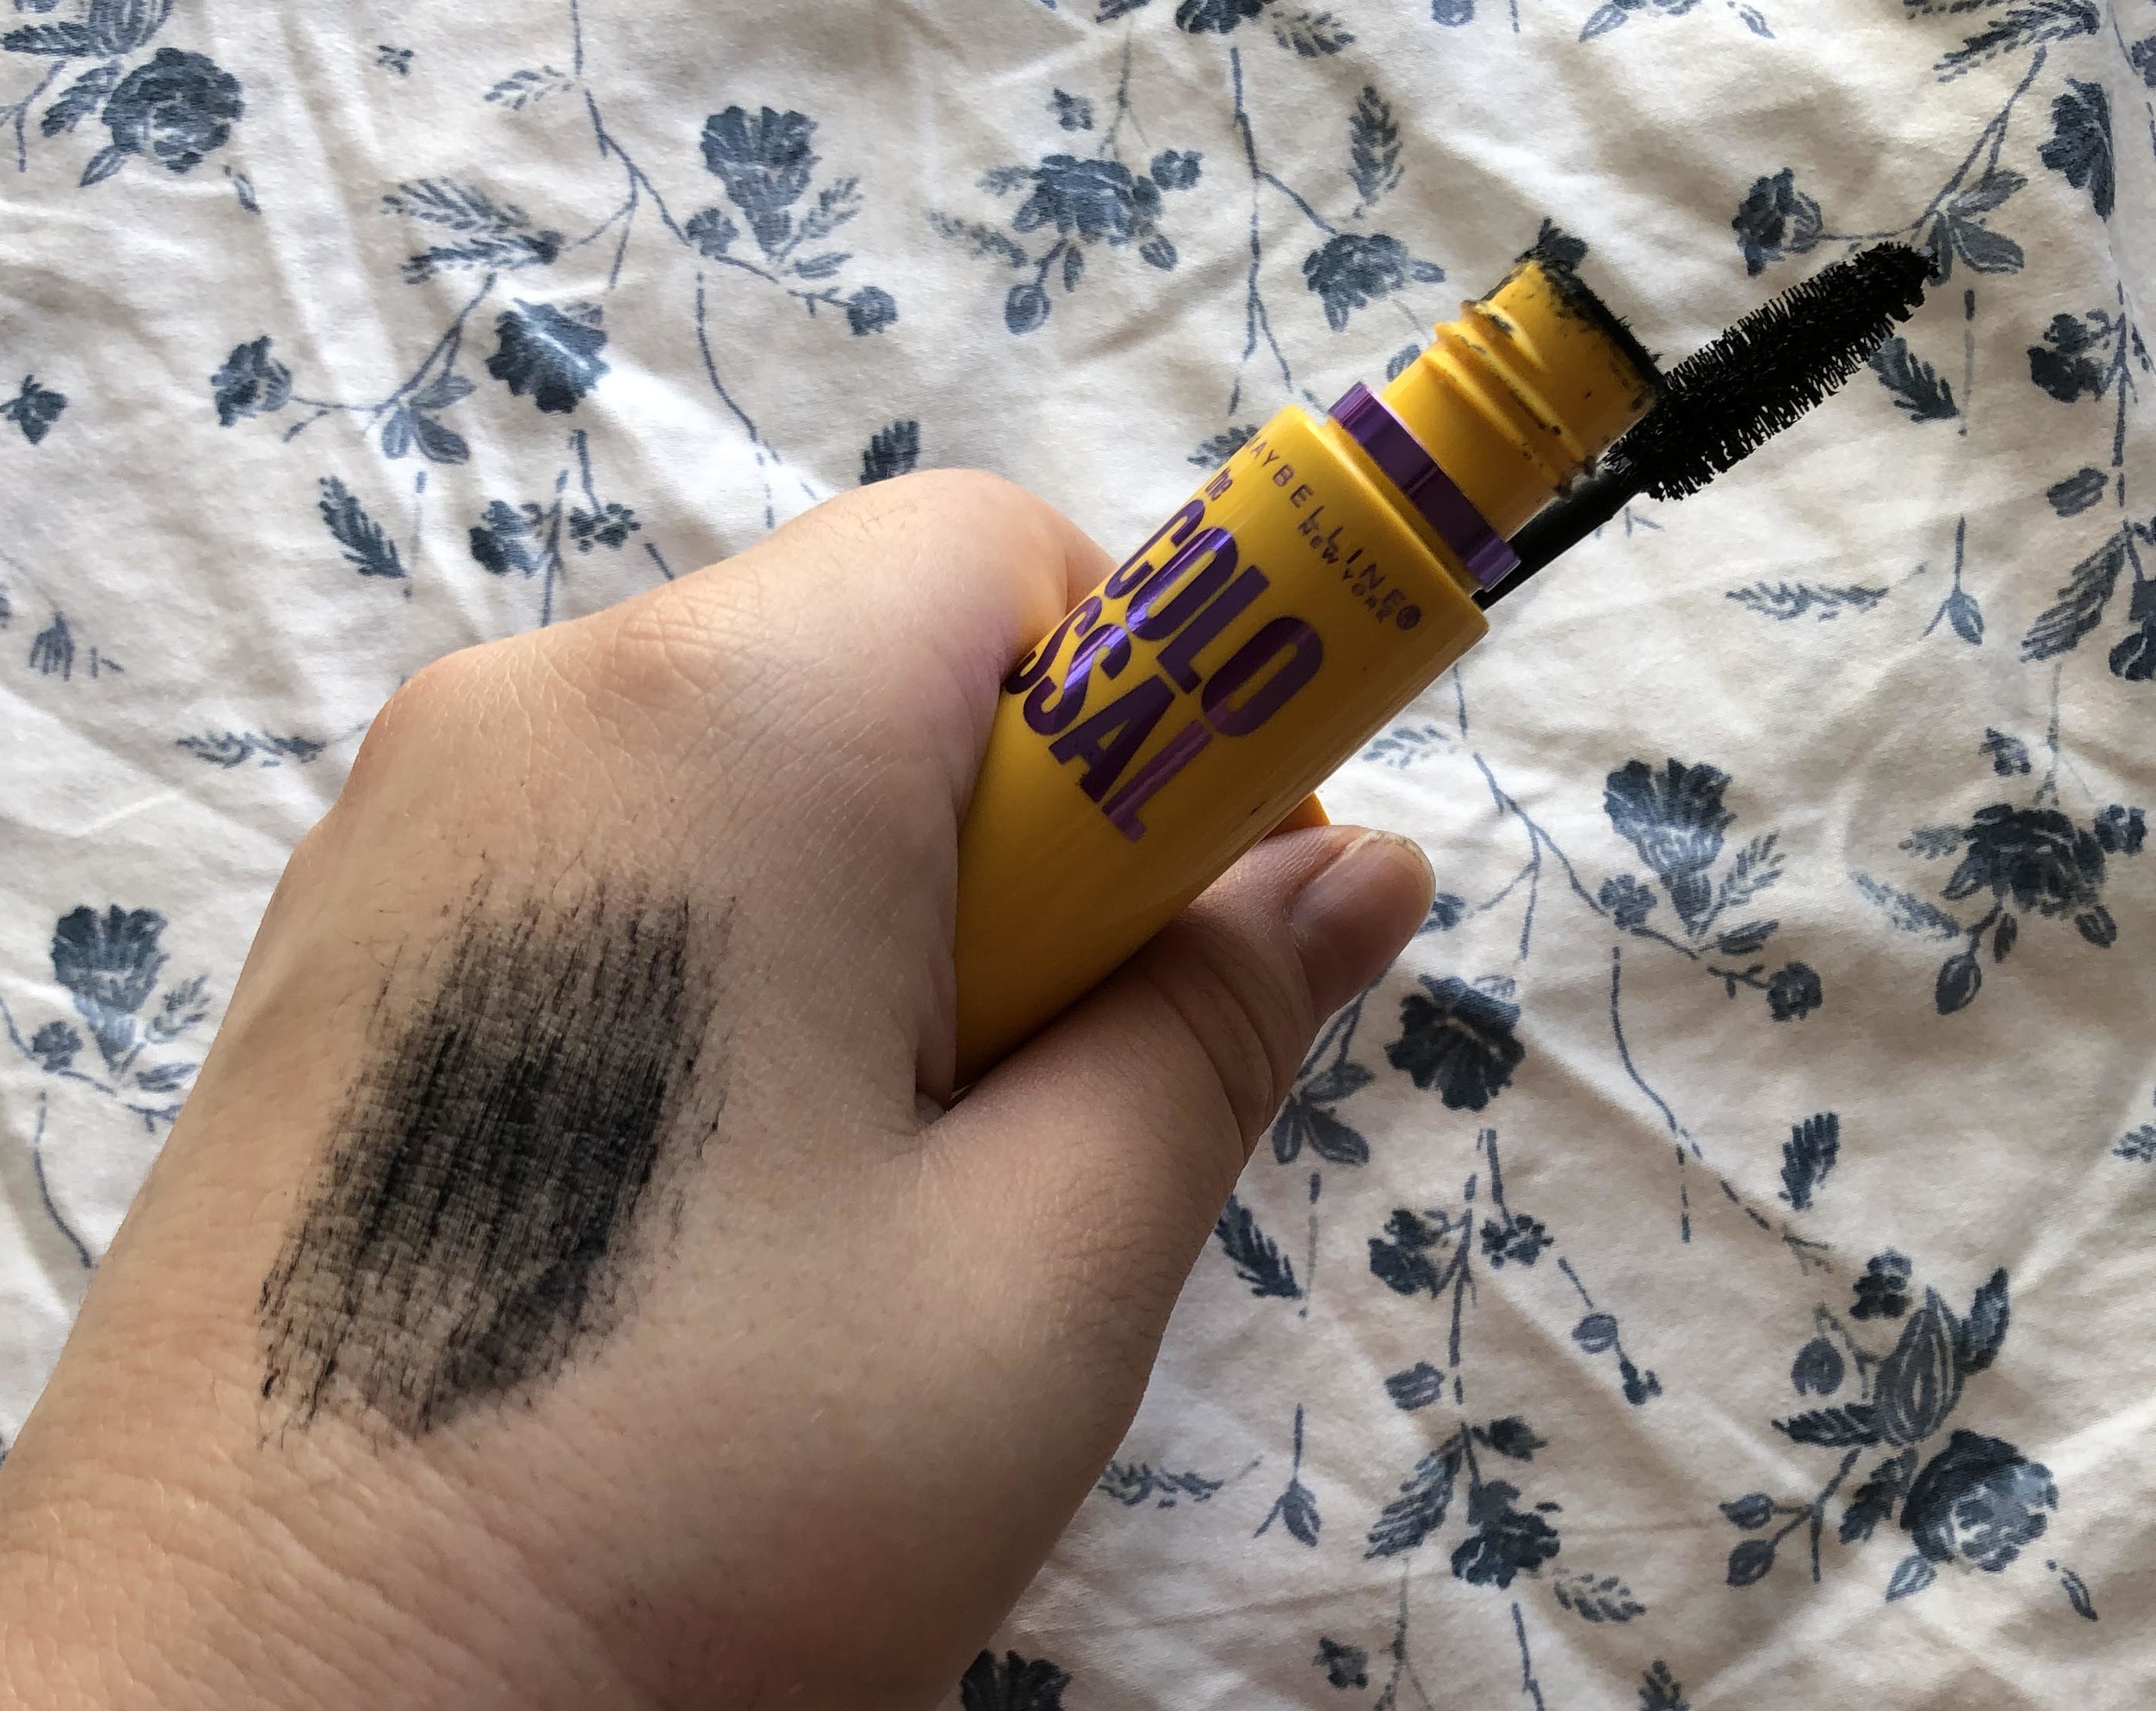 The Maybelline Colossal Mascara swatched on my hand